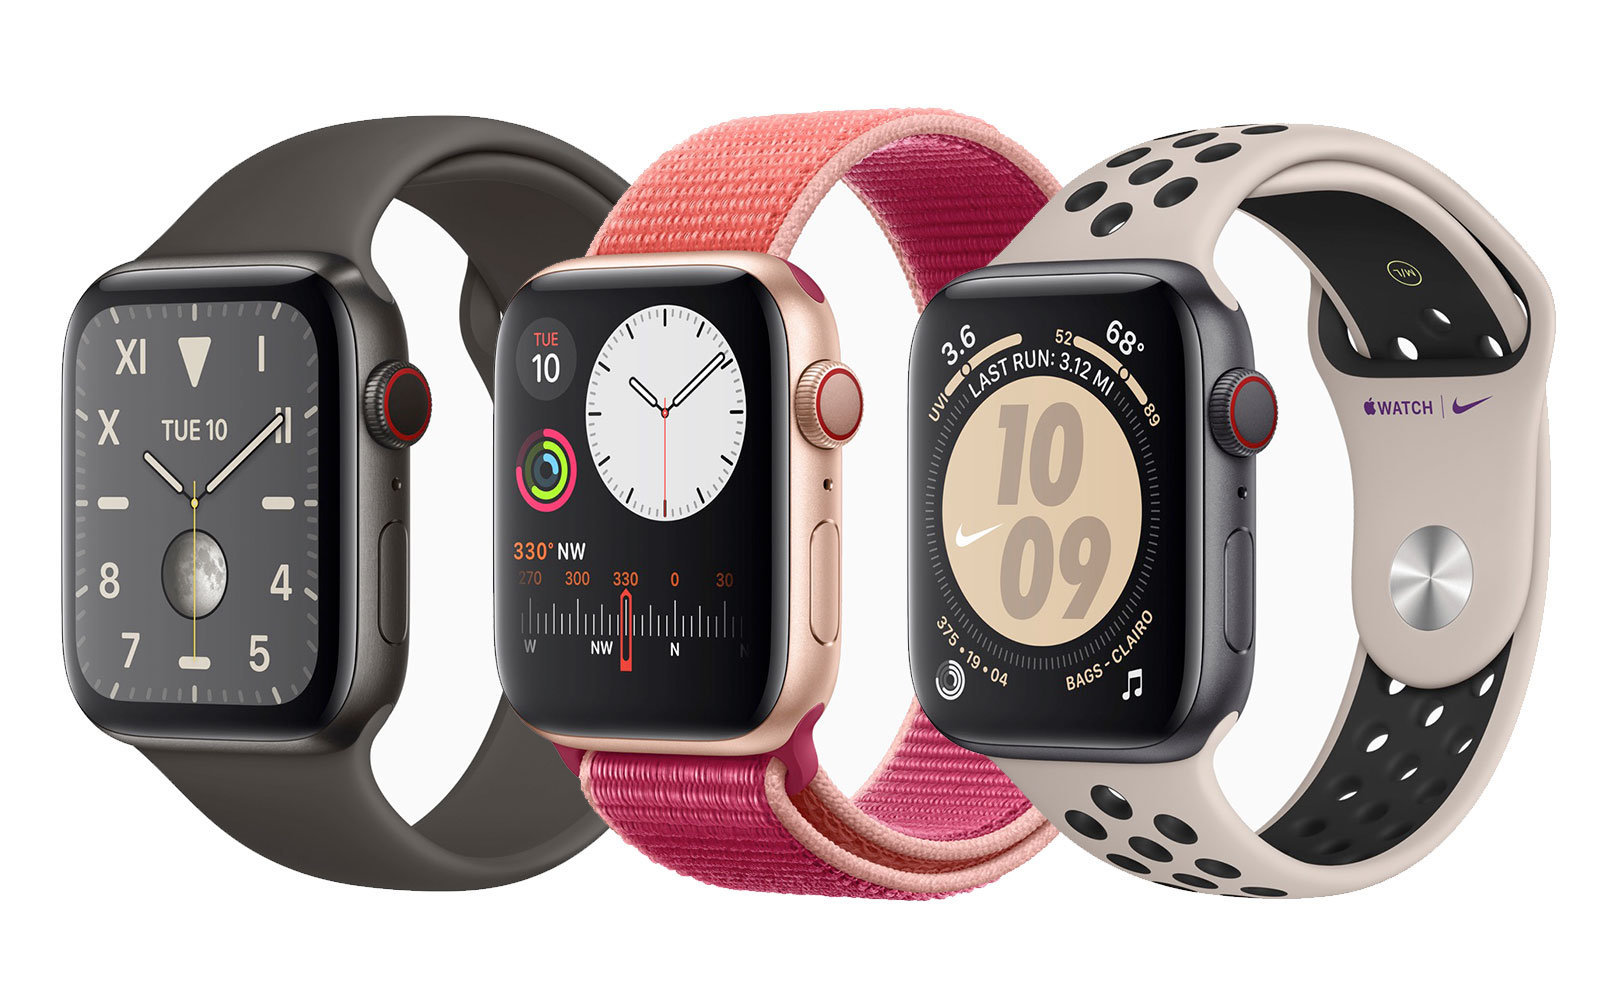 Apple Watch Series 5 With Always-On Retina Display Launched: Price in